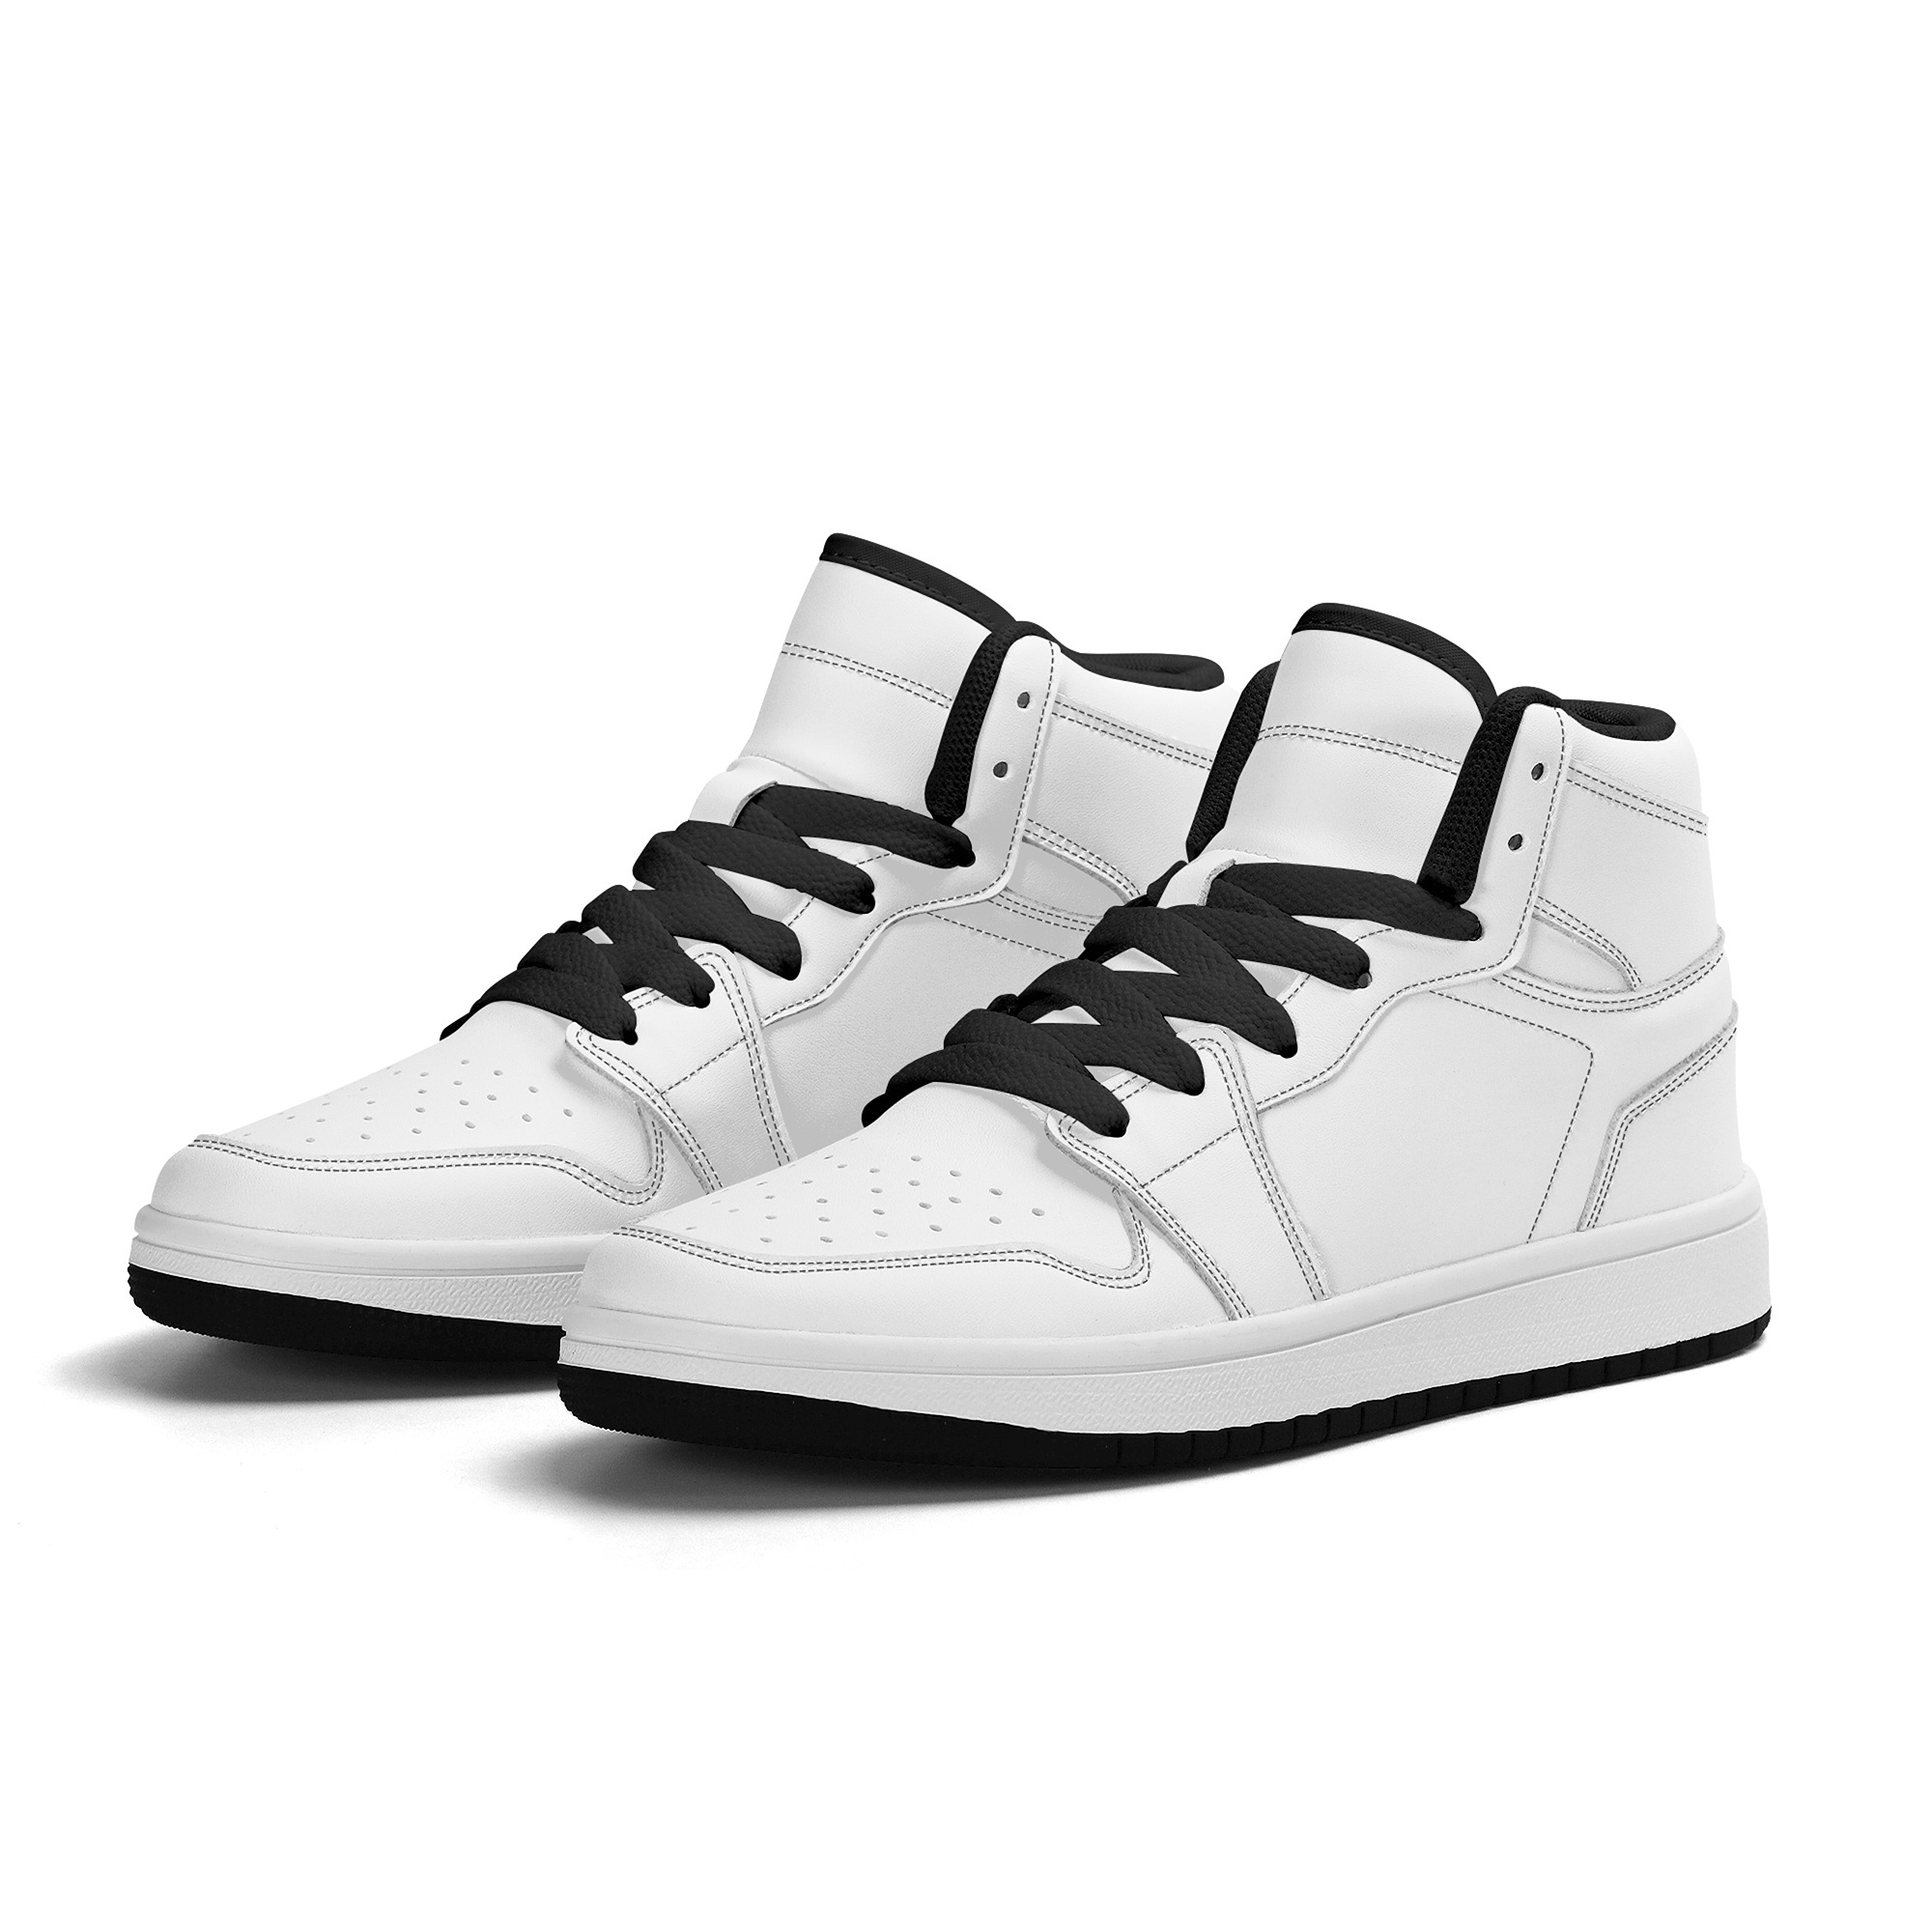 Kids Customizable High Top Leather Sneakers | Design your own | Shoe Zero